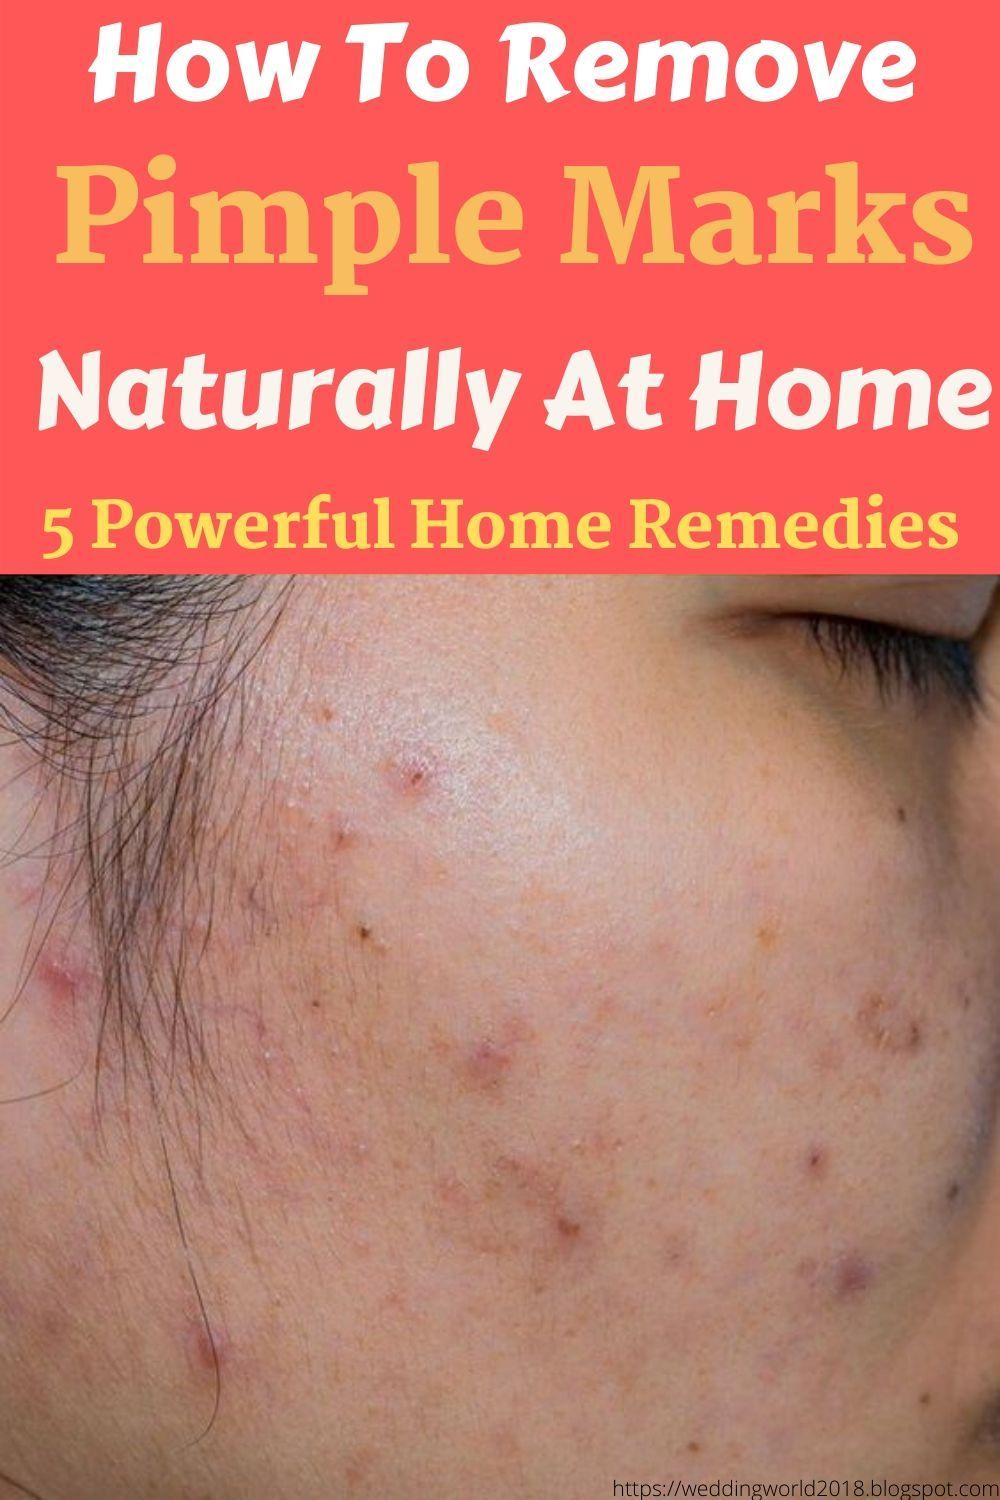 How To Remove Pimple Marks Naturally At Home - 5 Powerful Home Remedies - How To Remove Pimple Marks Naturally At Home - 5 Powerful Home Remedies -   18 beauty Treatments pimples ideas